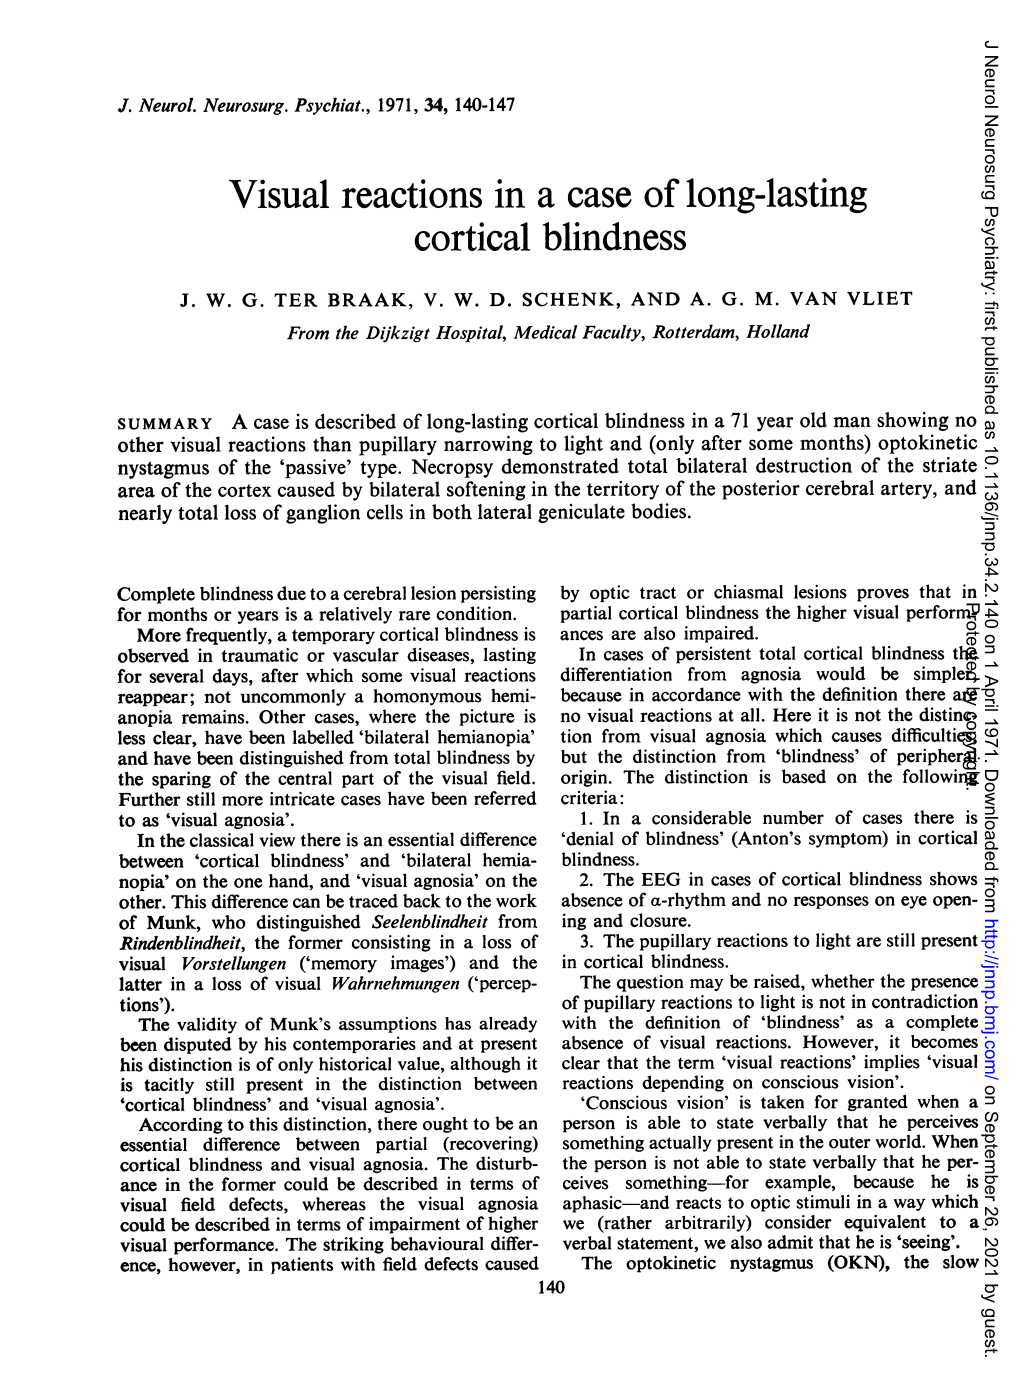 Visual Reactions in a Case of Long-Lasting Cortical Blindness